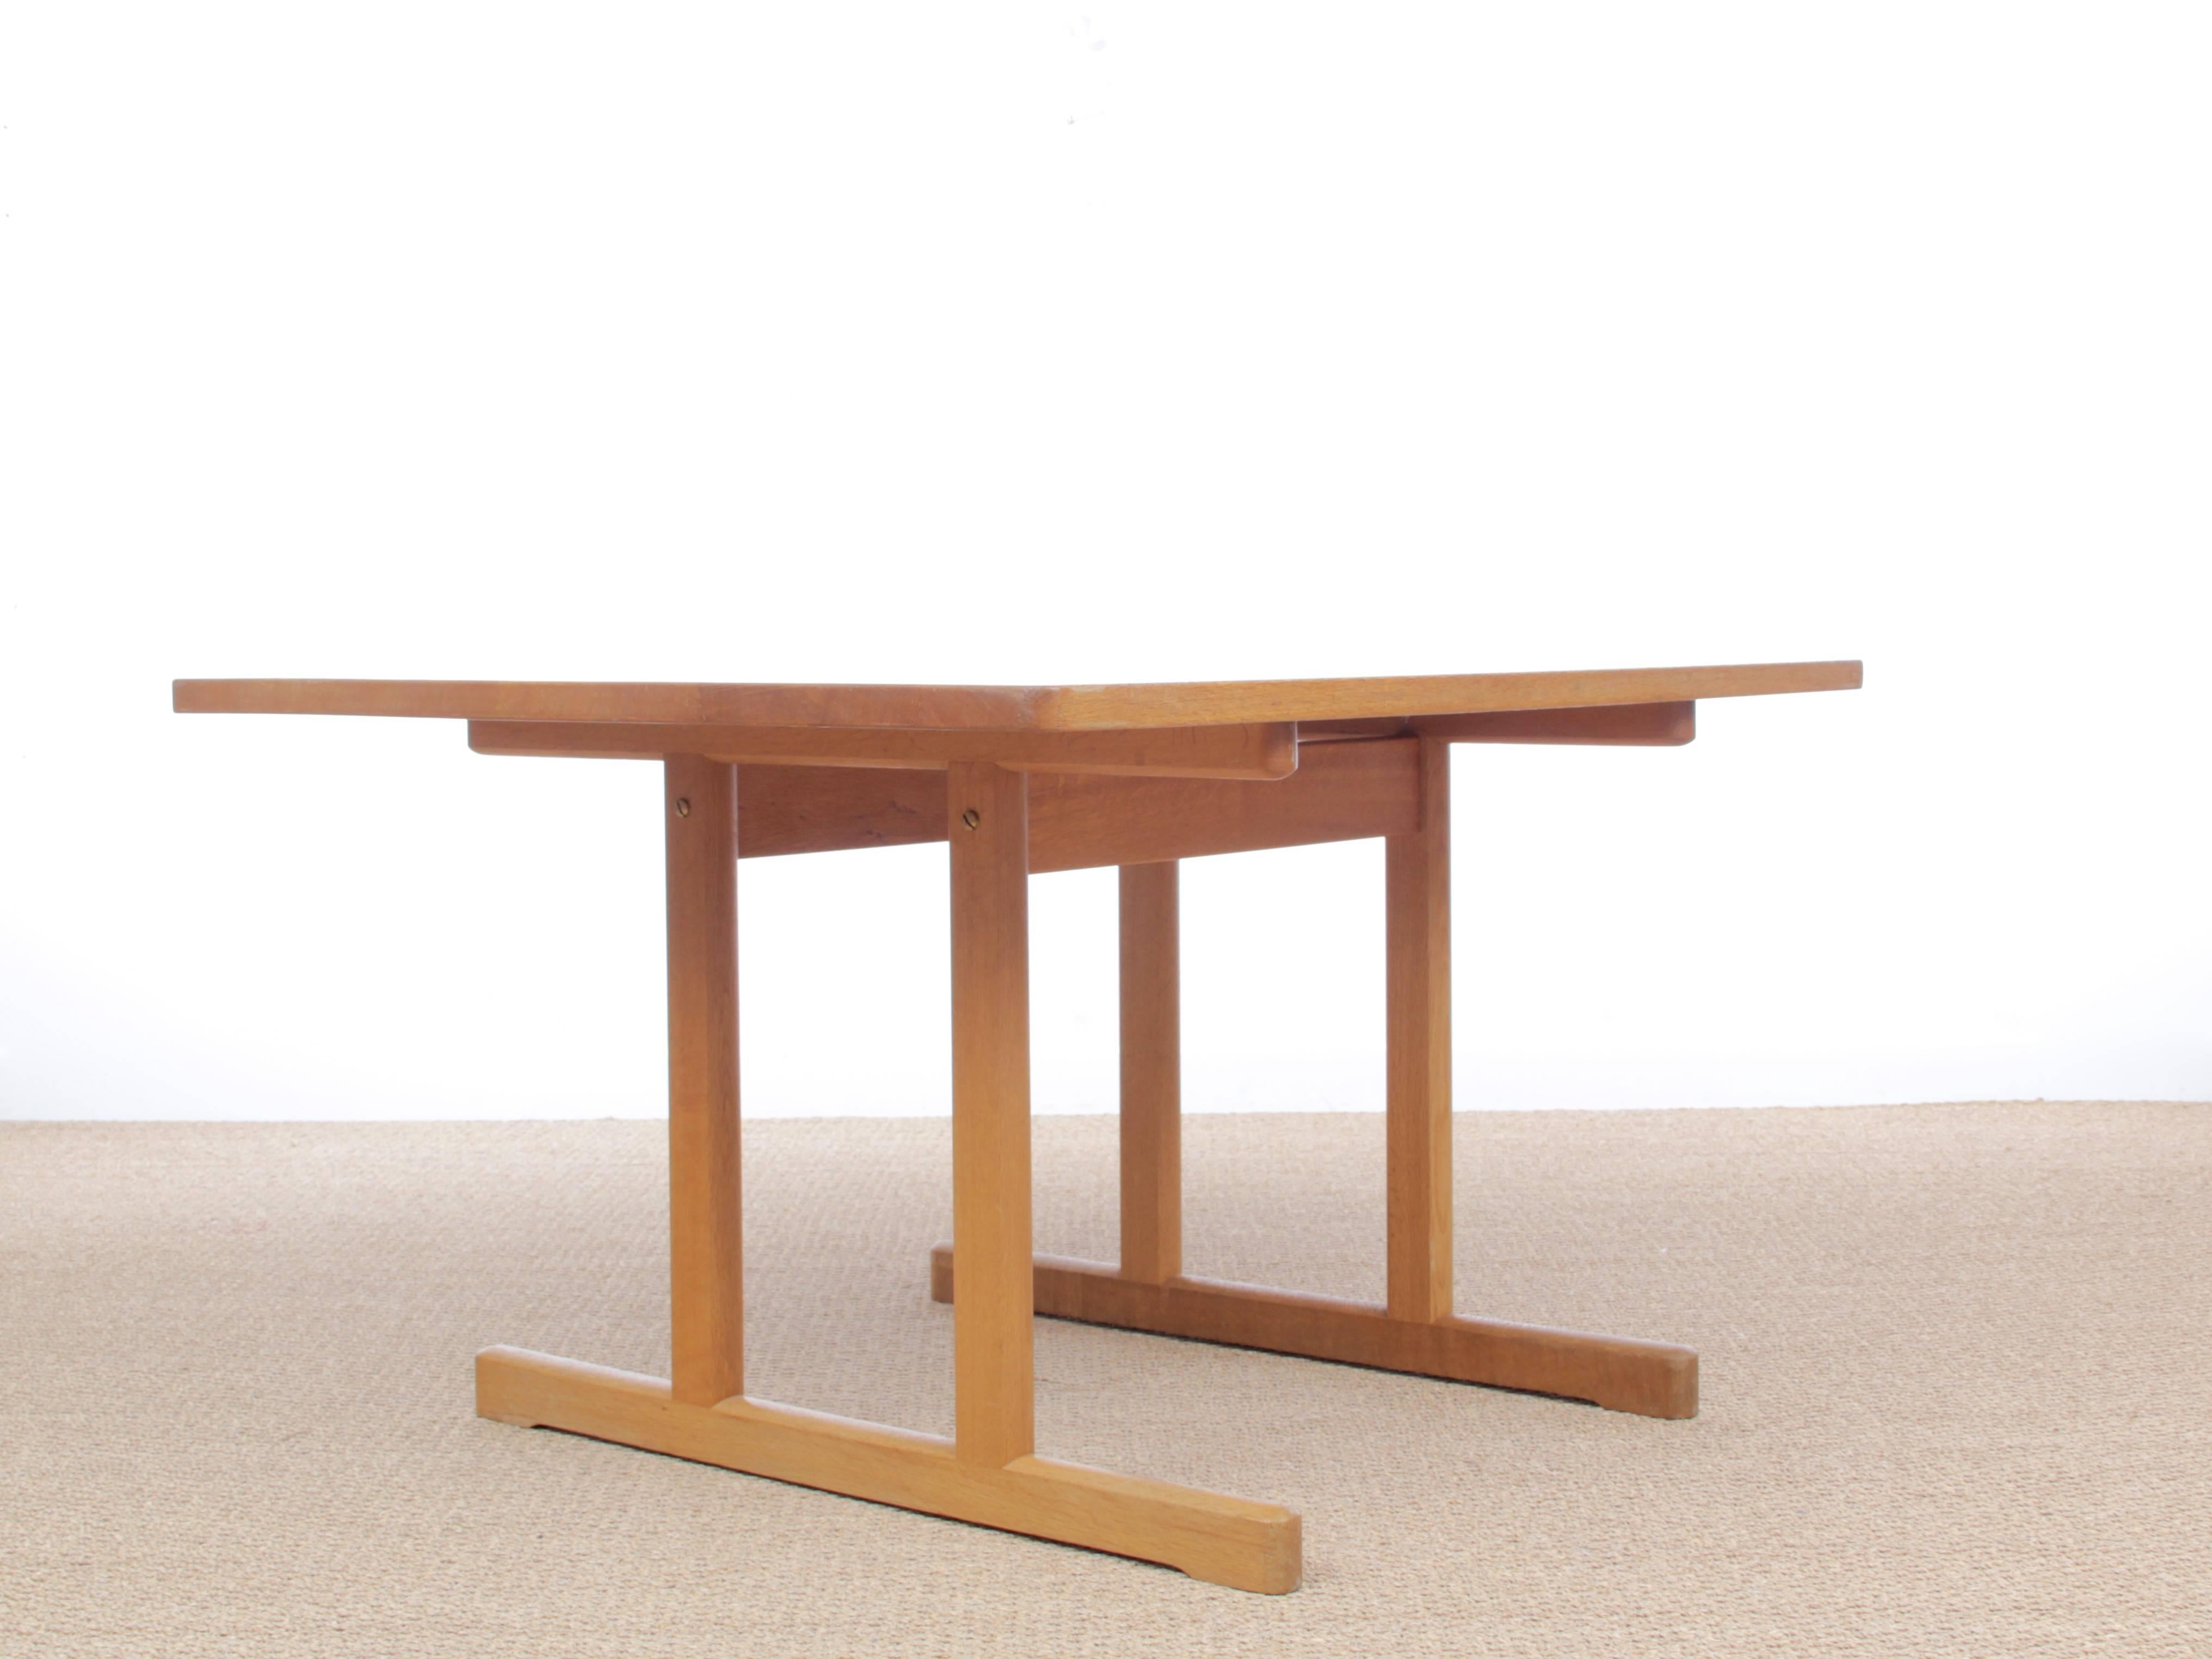 Mid-Century Modern Scandinavian dining table Shaker 6287 by Børge Mogensen for Fredericia Furniture. Solid laquered oak. Piece bought in 1970. Referenced by the Design Museum Denmark under number RP13988.